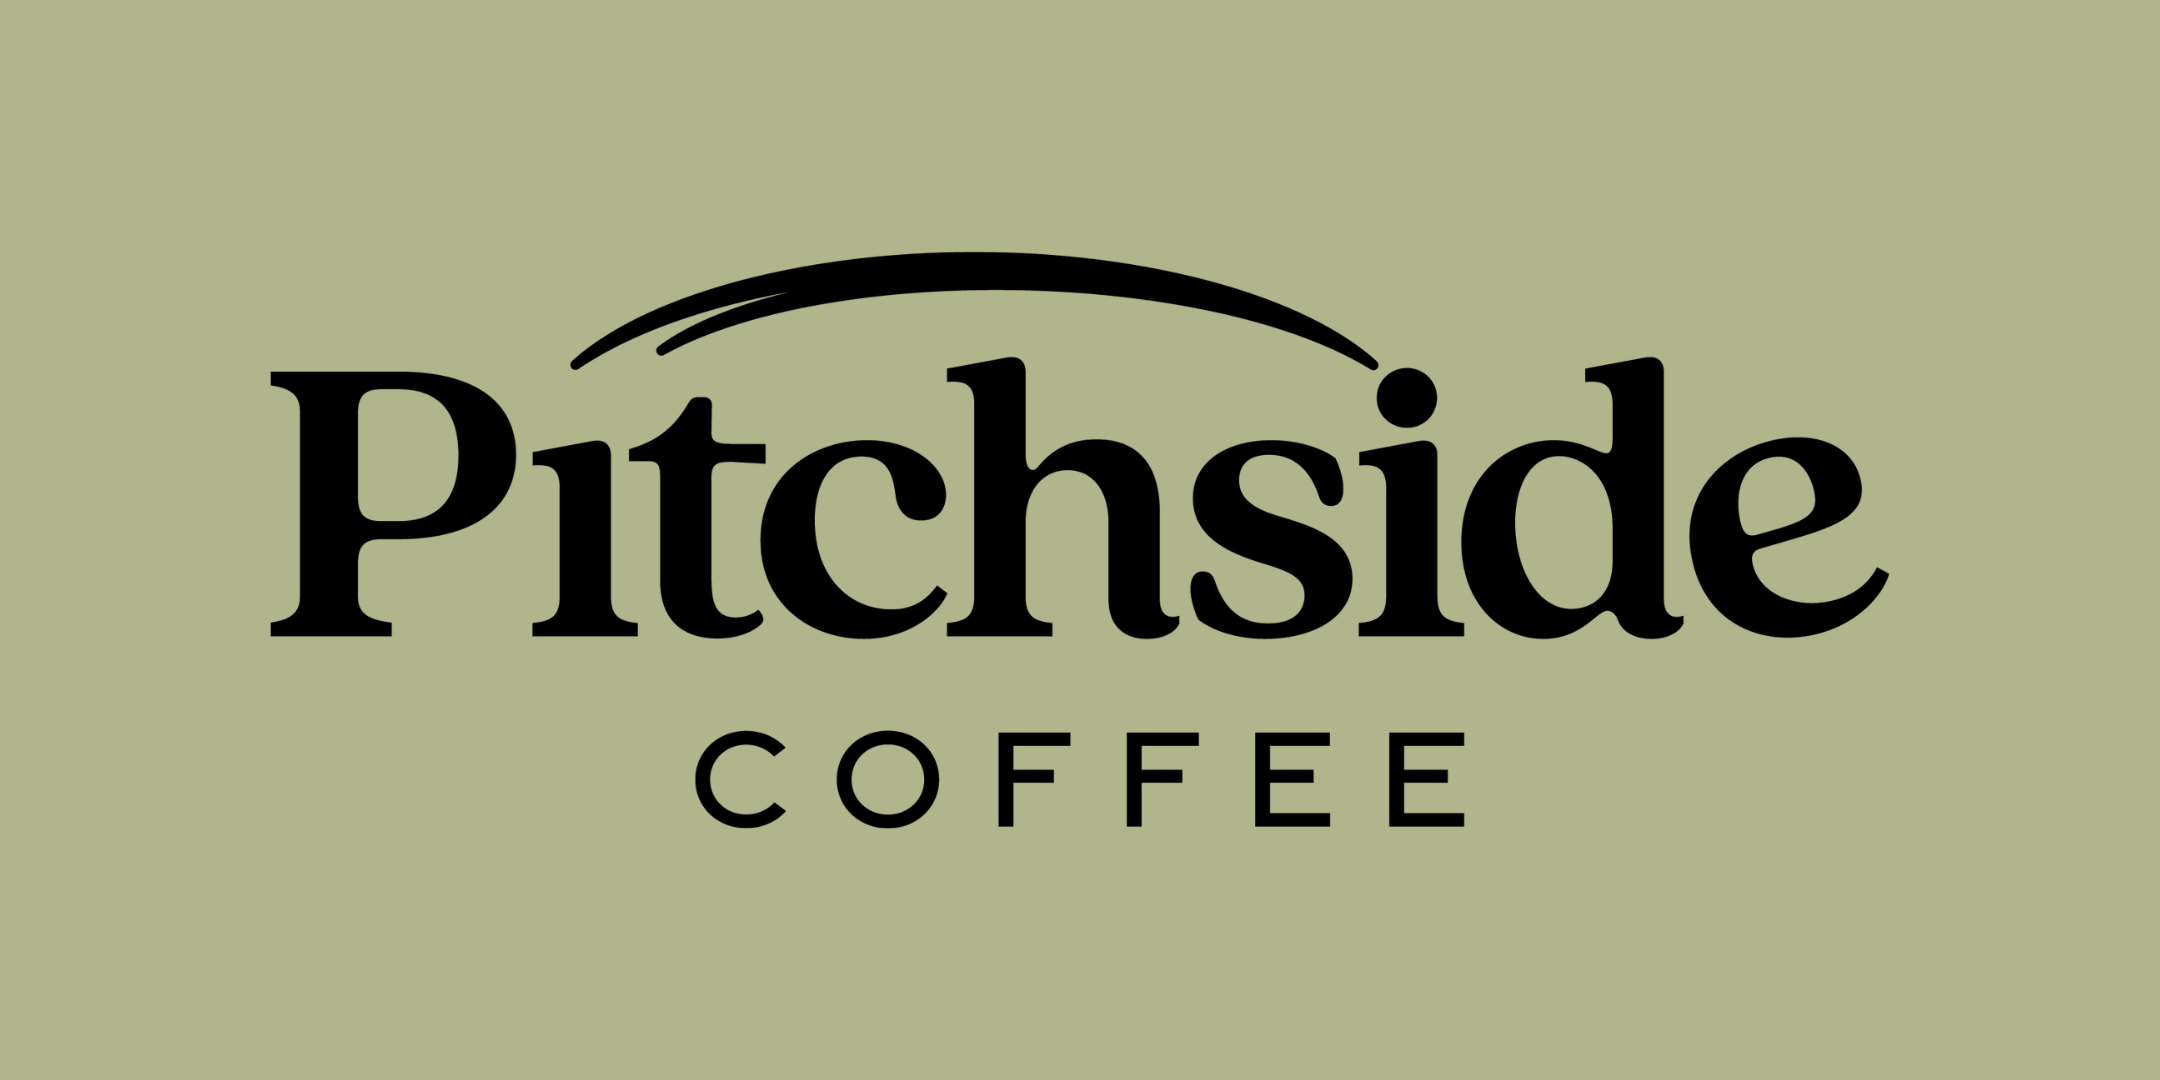 Pitchside Coffee is coming soon!